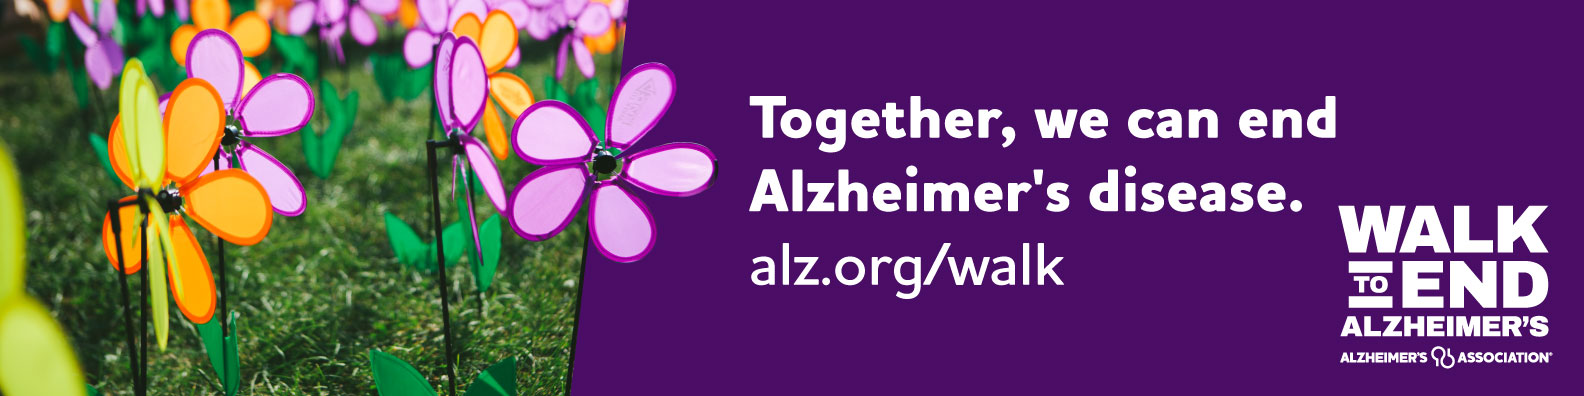 Together, we can end Alzheimer's disease (with walkers)